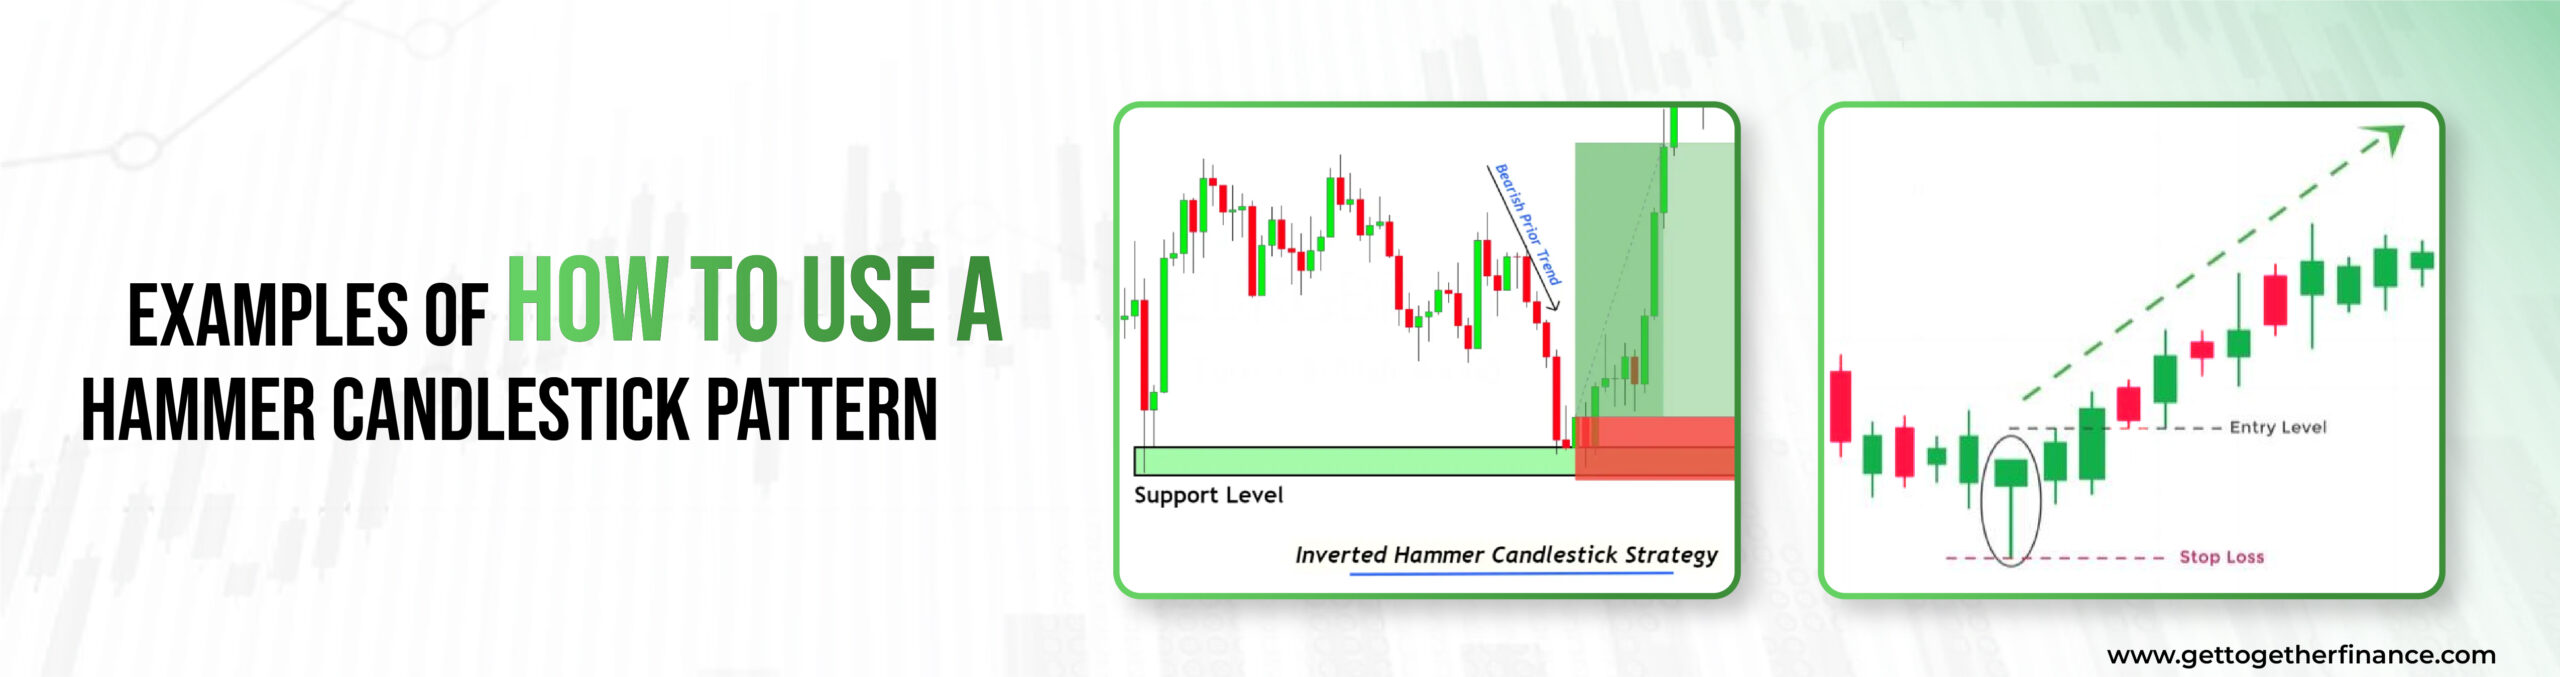 example of how to use a hammer candlestick pattern